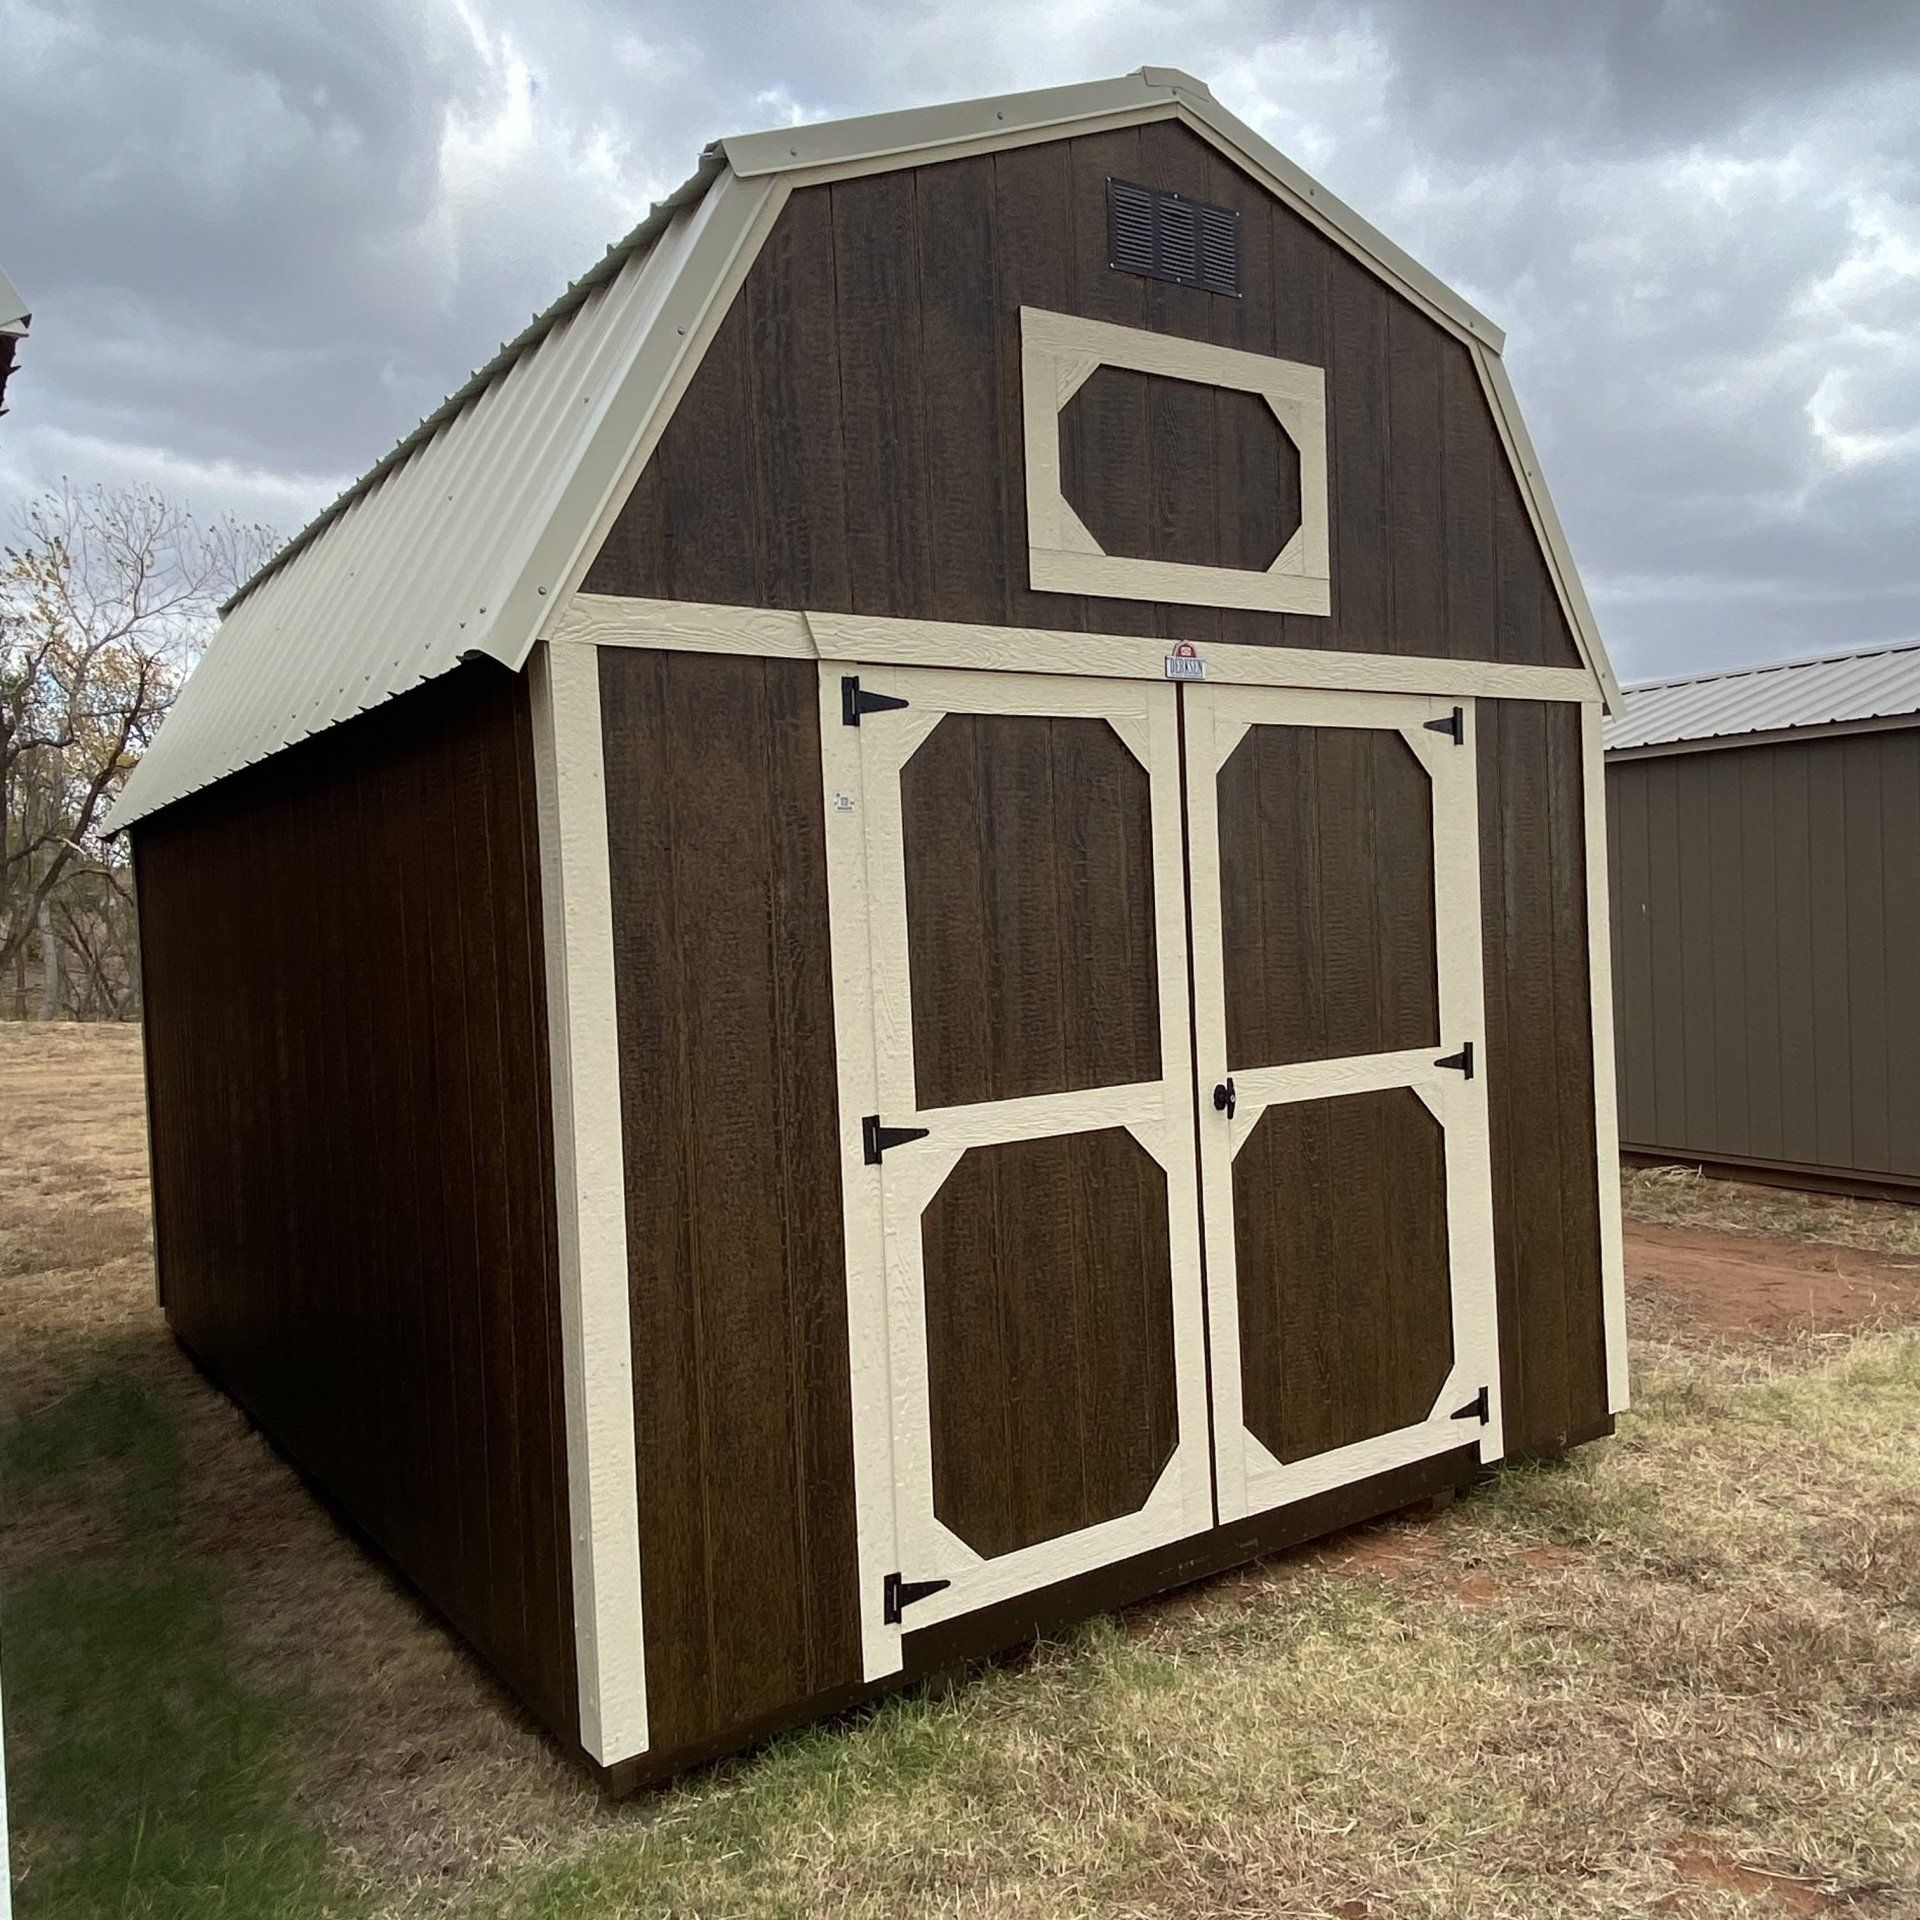 A brown barn shed with white trim is sitting in the middle of a field.